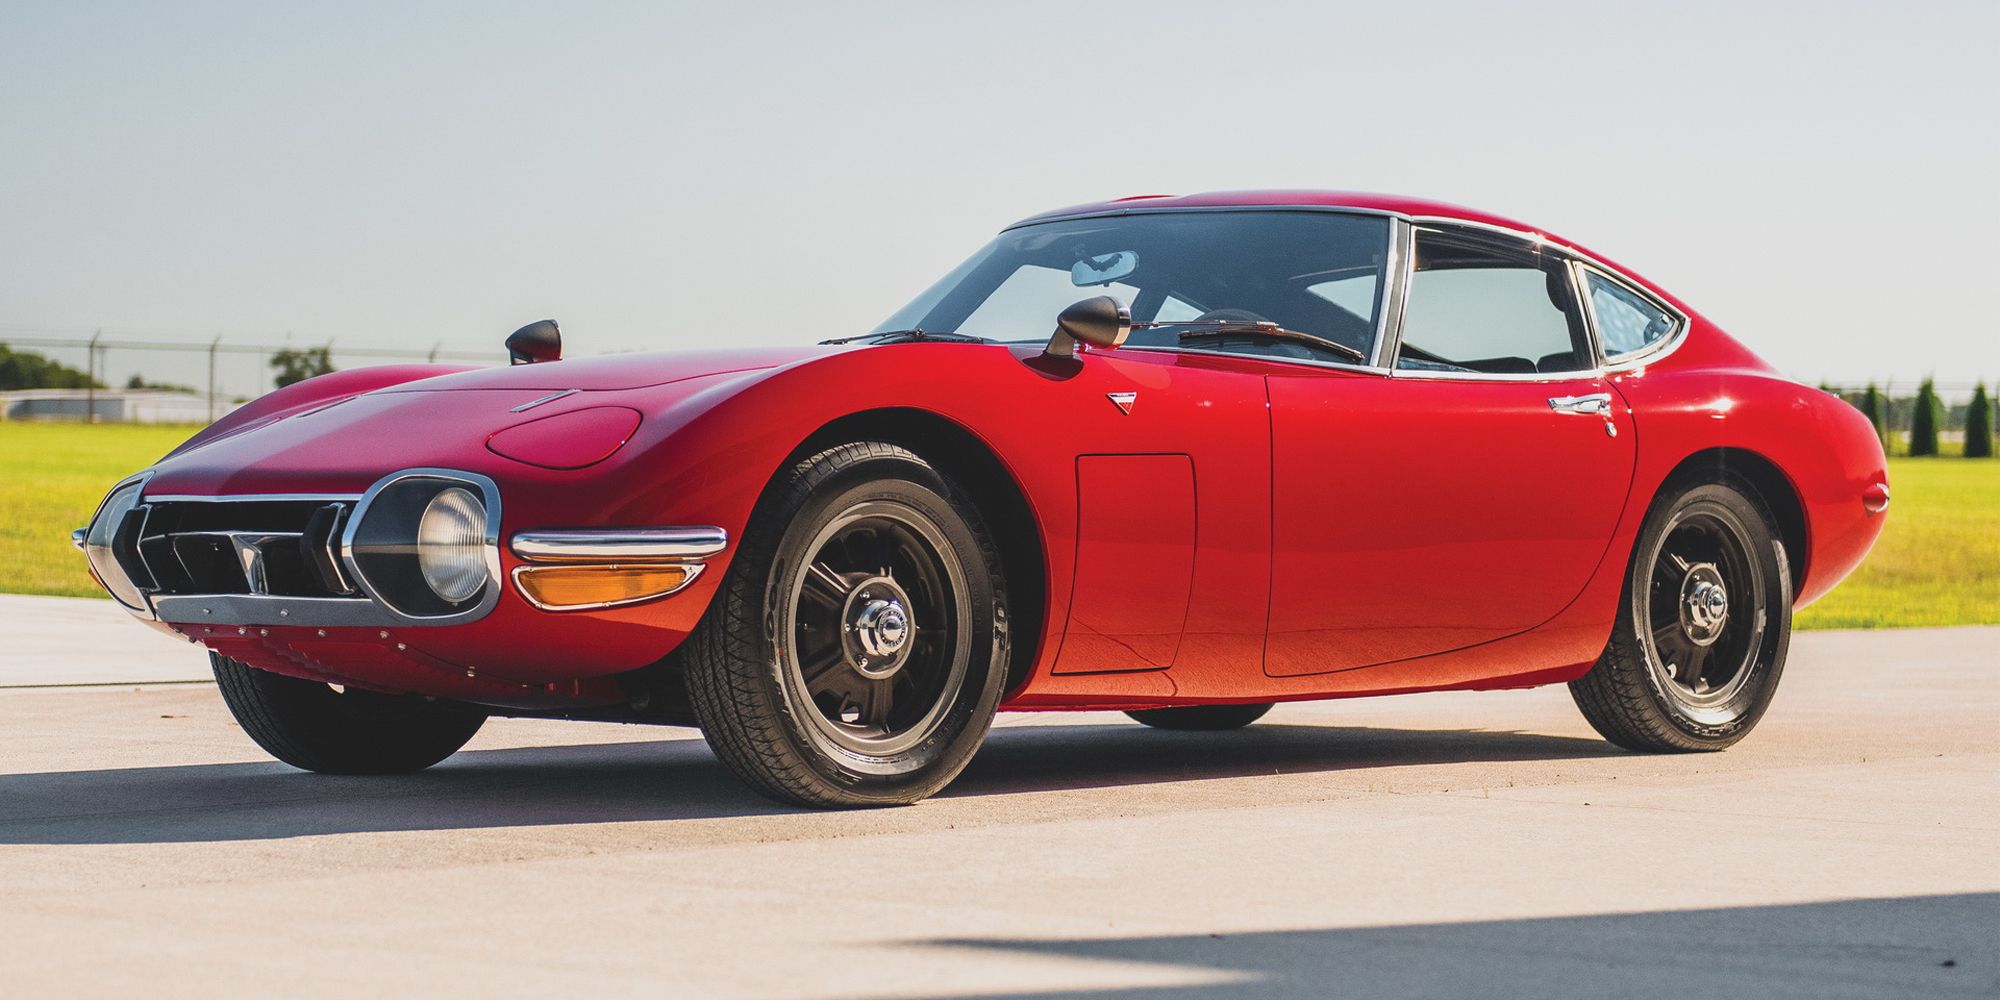 A red 2000GT